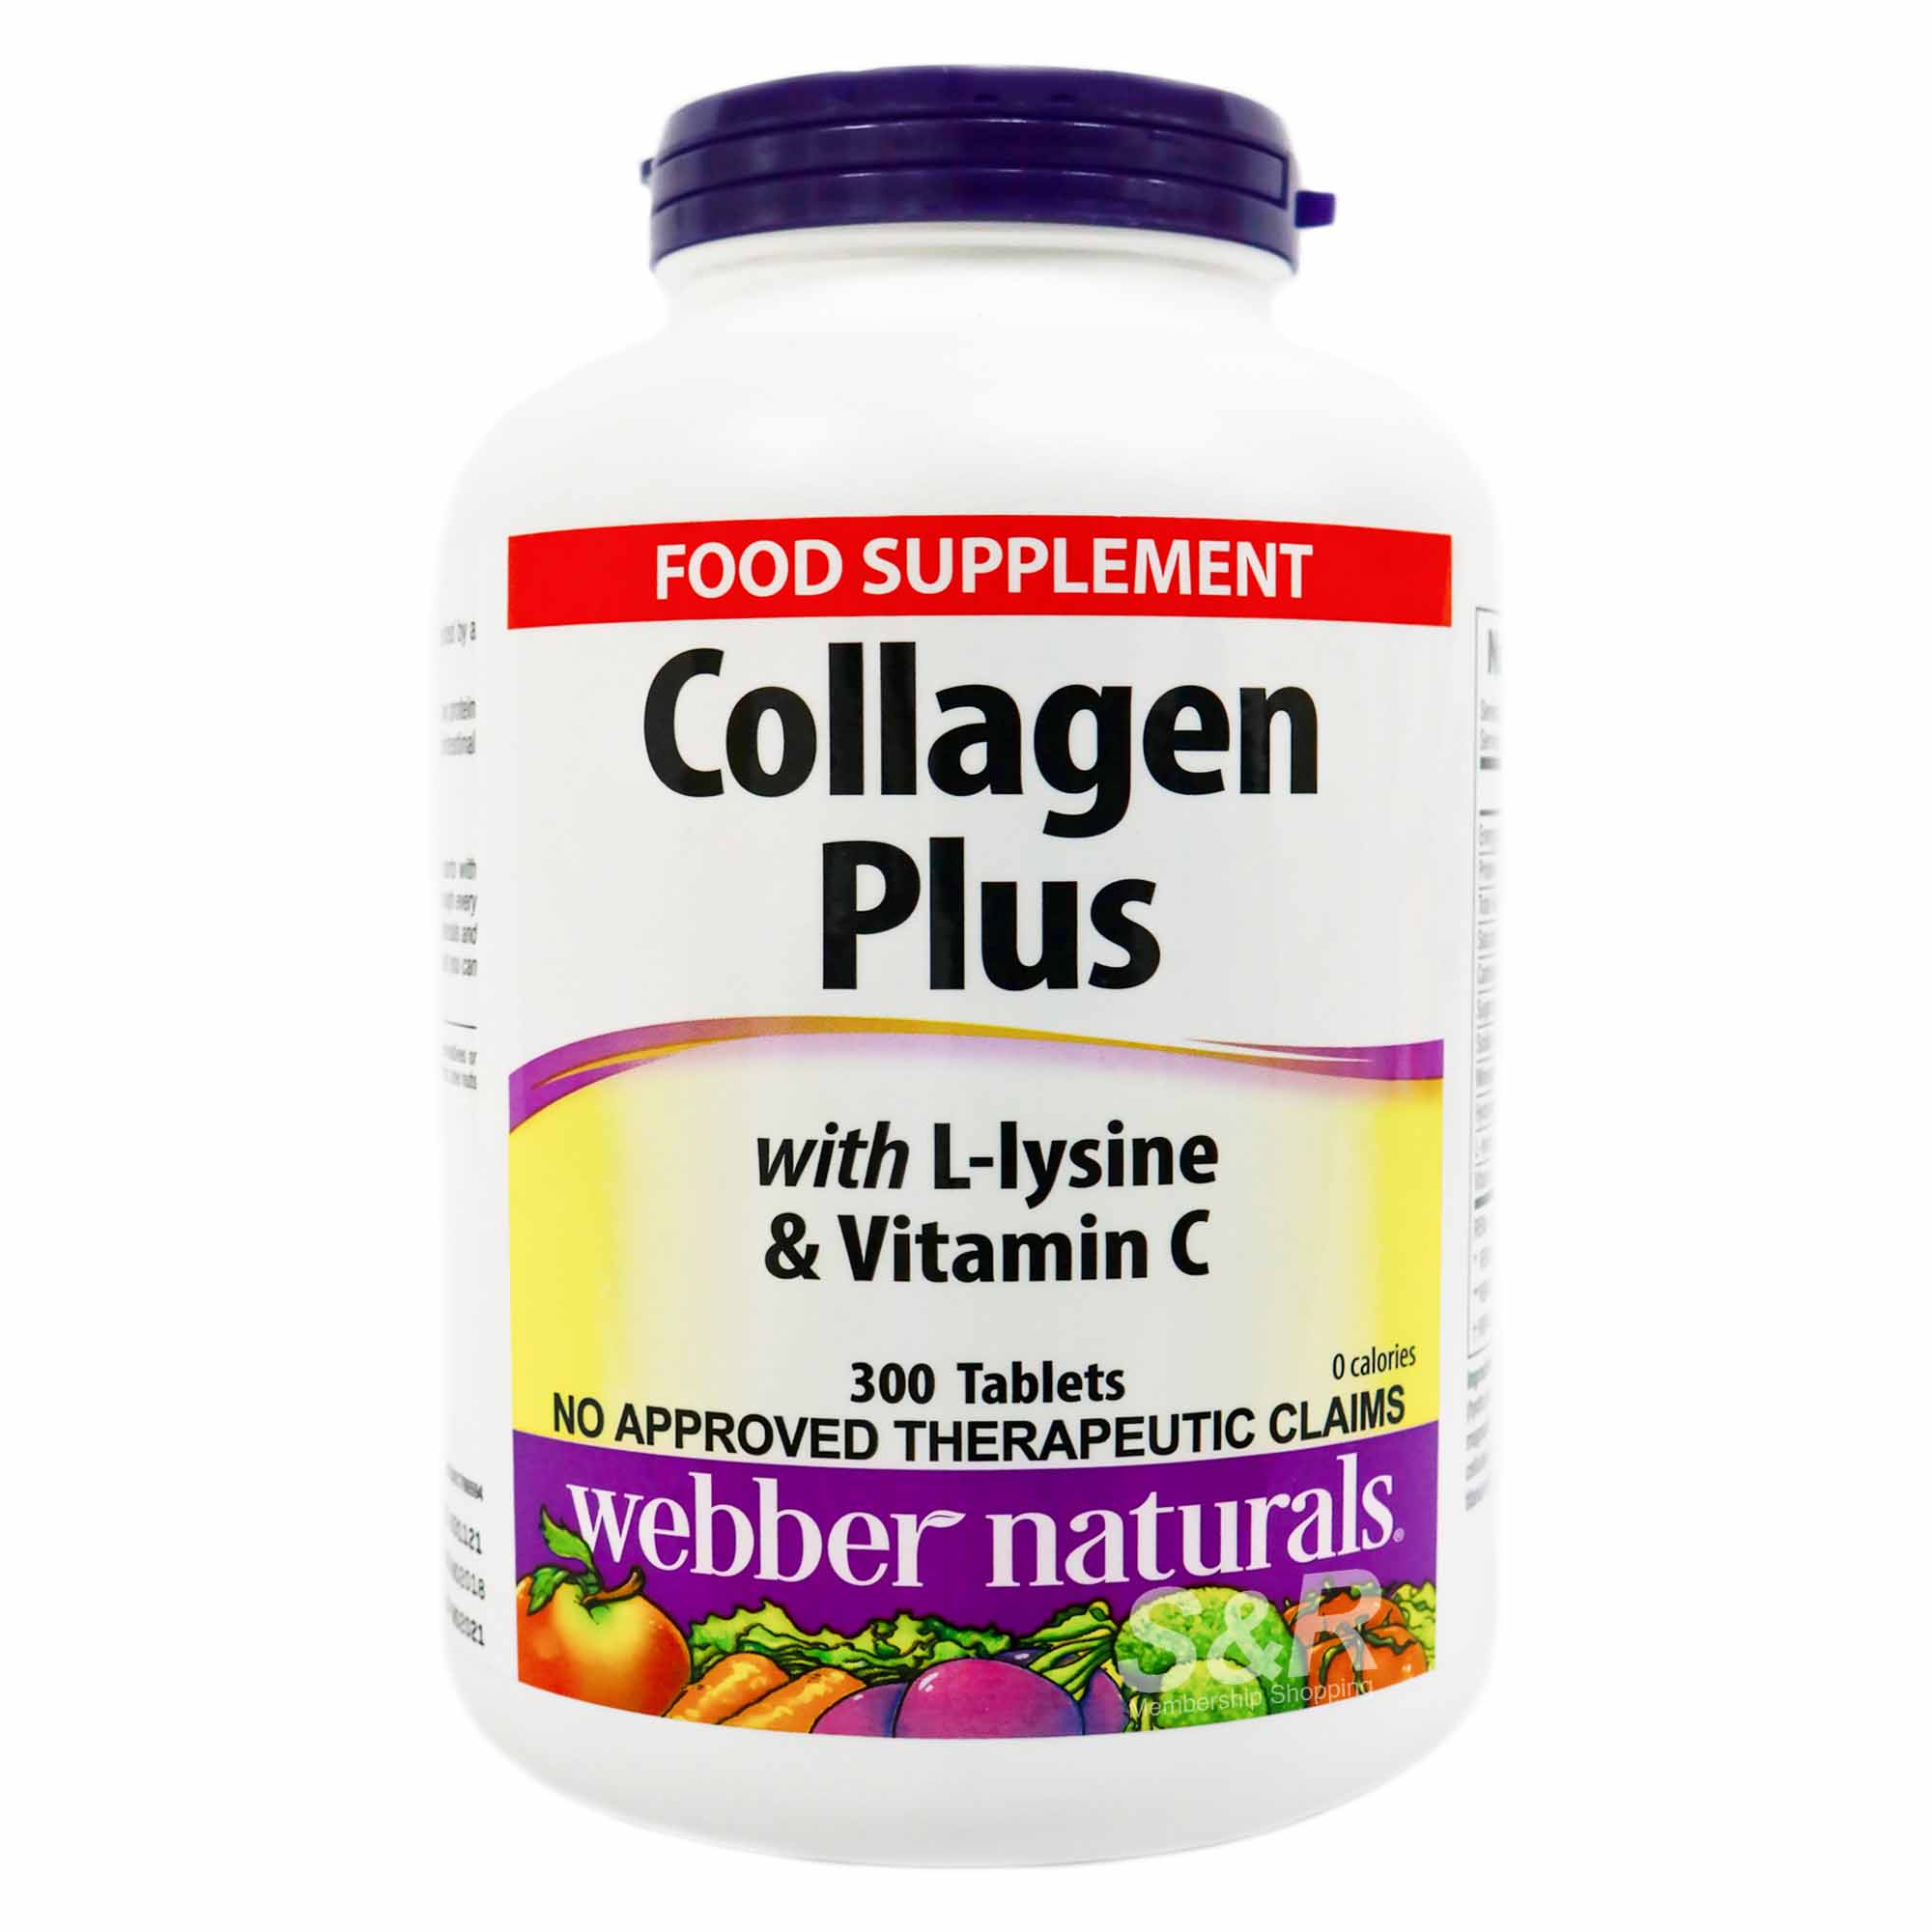 Webber Naturals Collagen Plus with L-lysine and Vitamin C 300 tablets